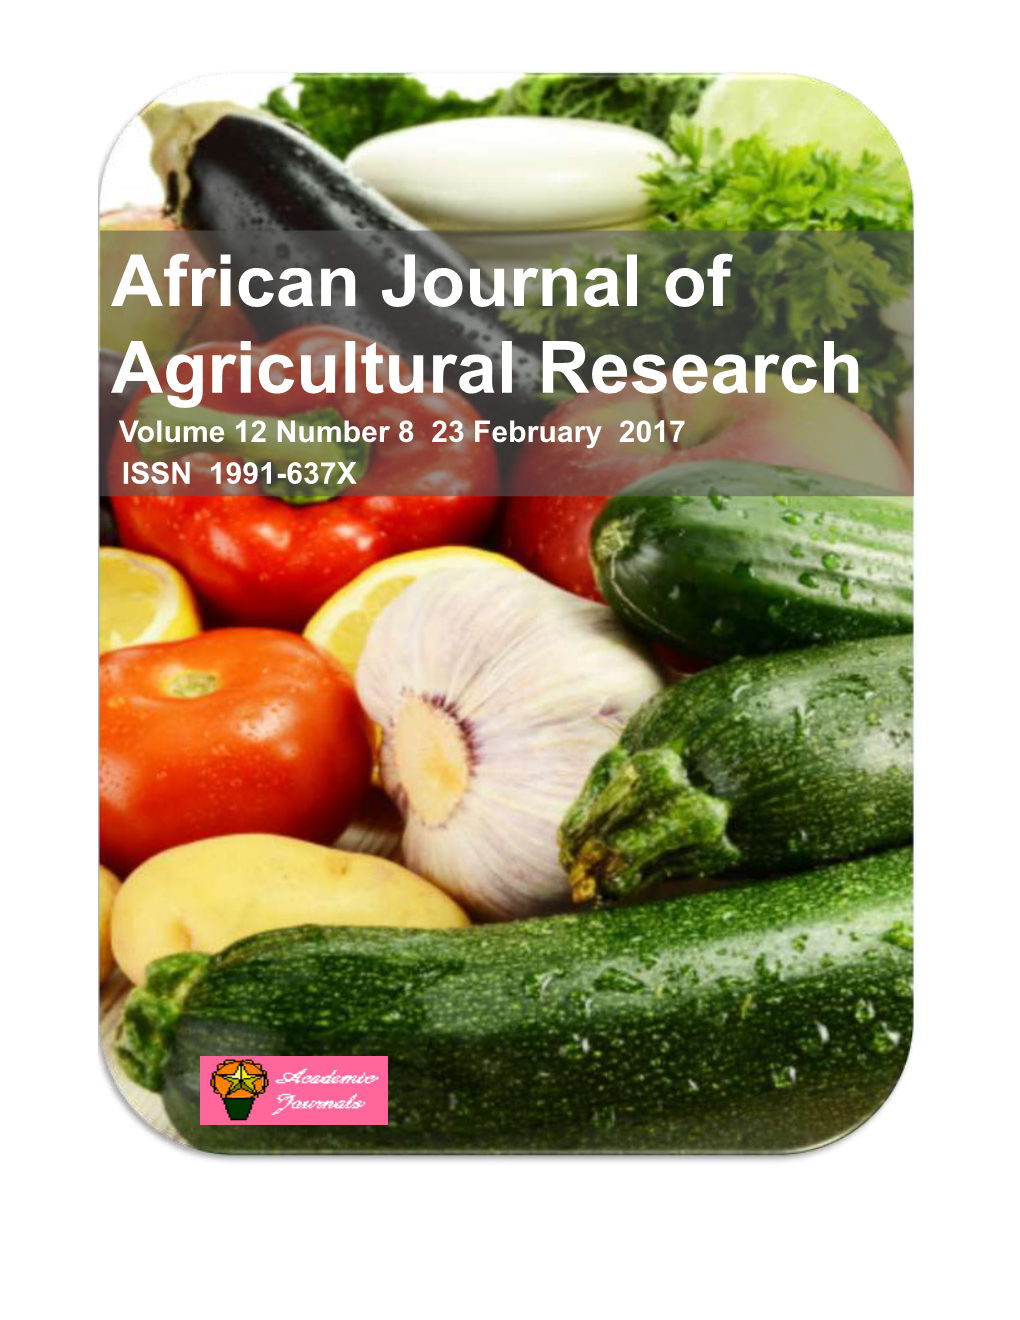 African Journal of Agricultural Research Volume 12 Number 8 23 February 2017 ISSN 1991-637X